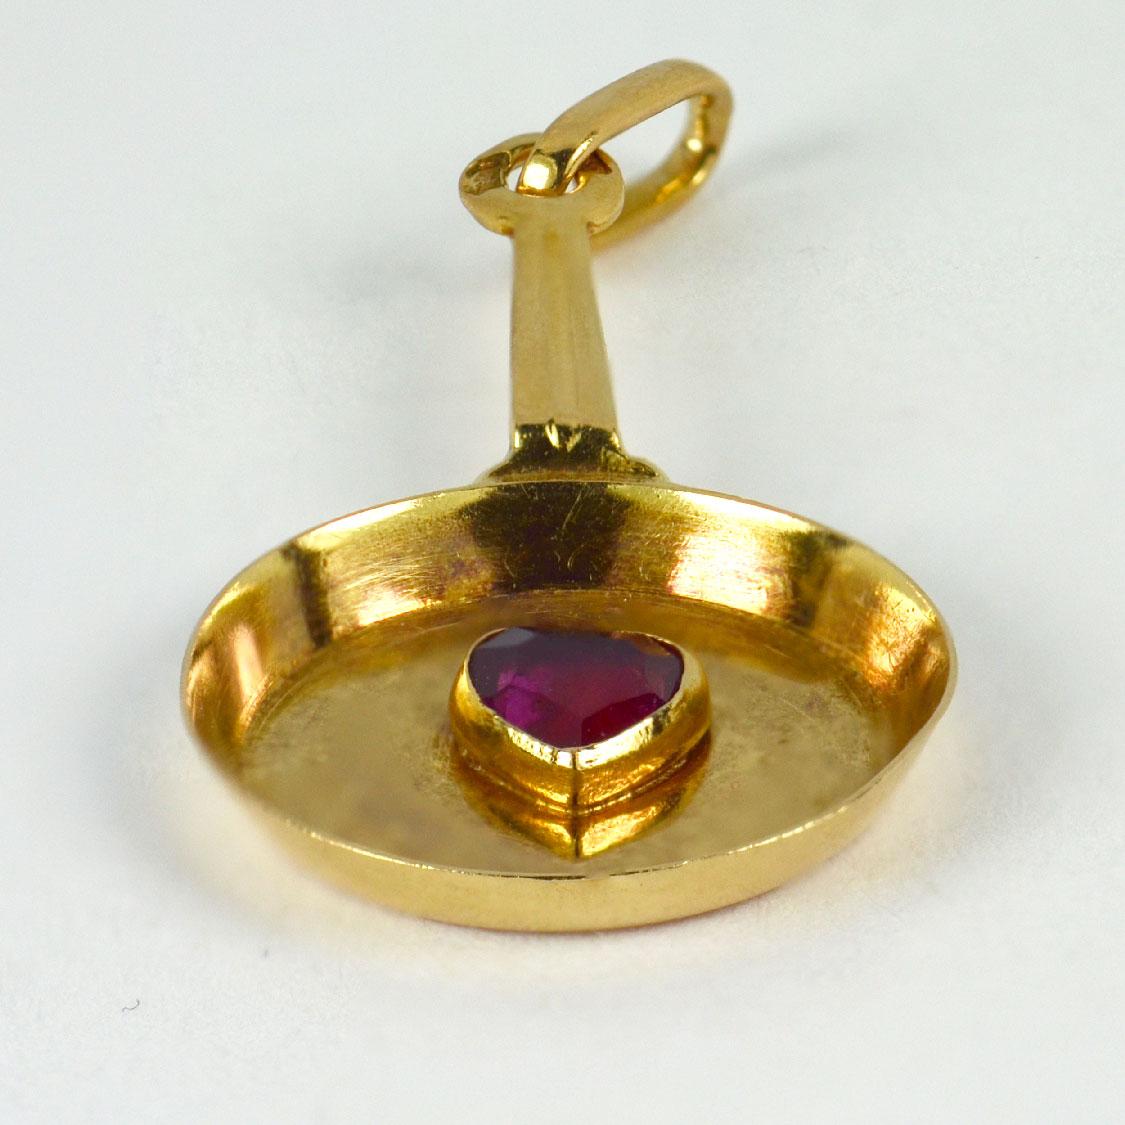 A French 18 karat (18K) yellow gold charm pendant designed as a frying pan set with a ruby heart to the centre. Stamped with the eagle’s head for 18 karat gold and French manufacture with unknown makers mark. 

Dimensions: 2.4 x 1.3 x 0.2 cm (not